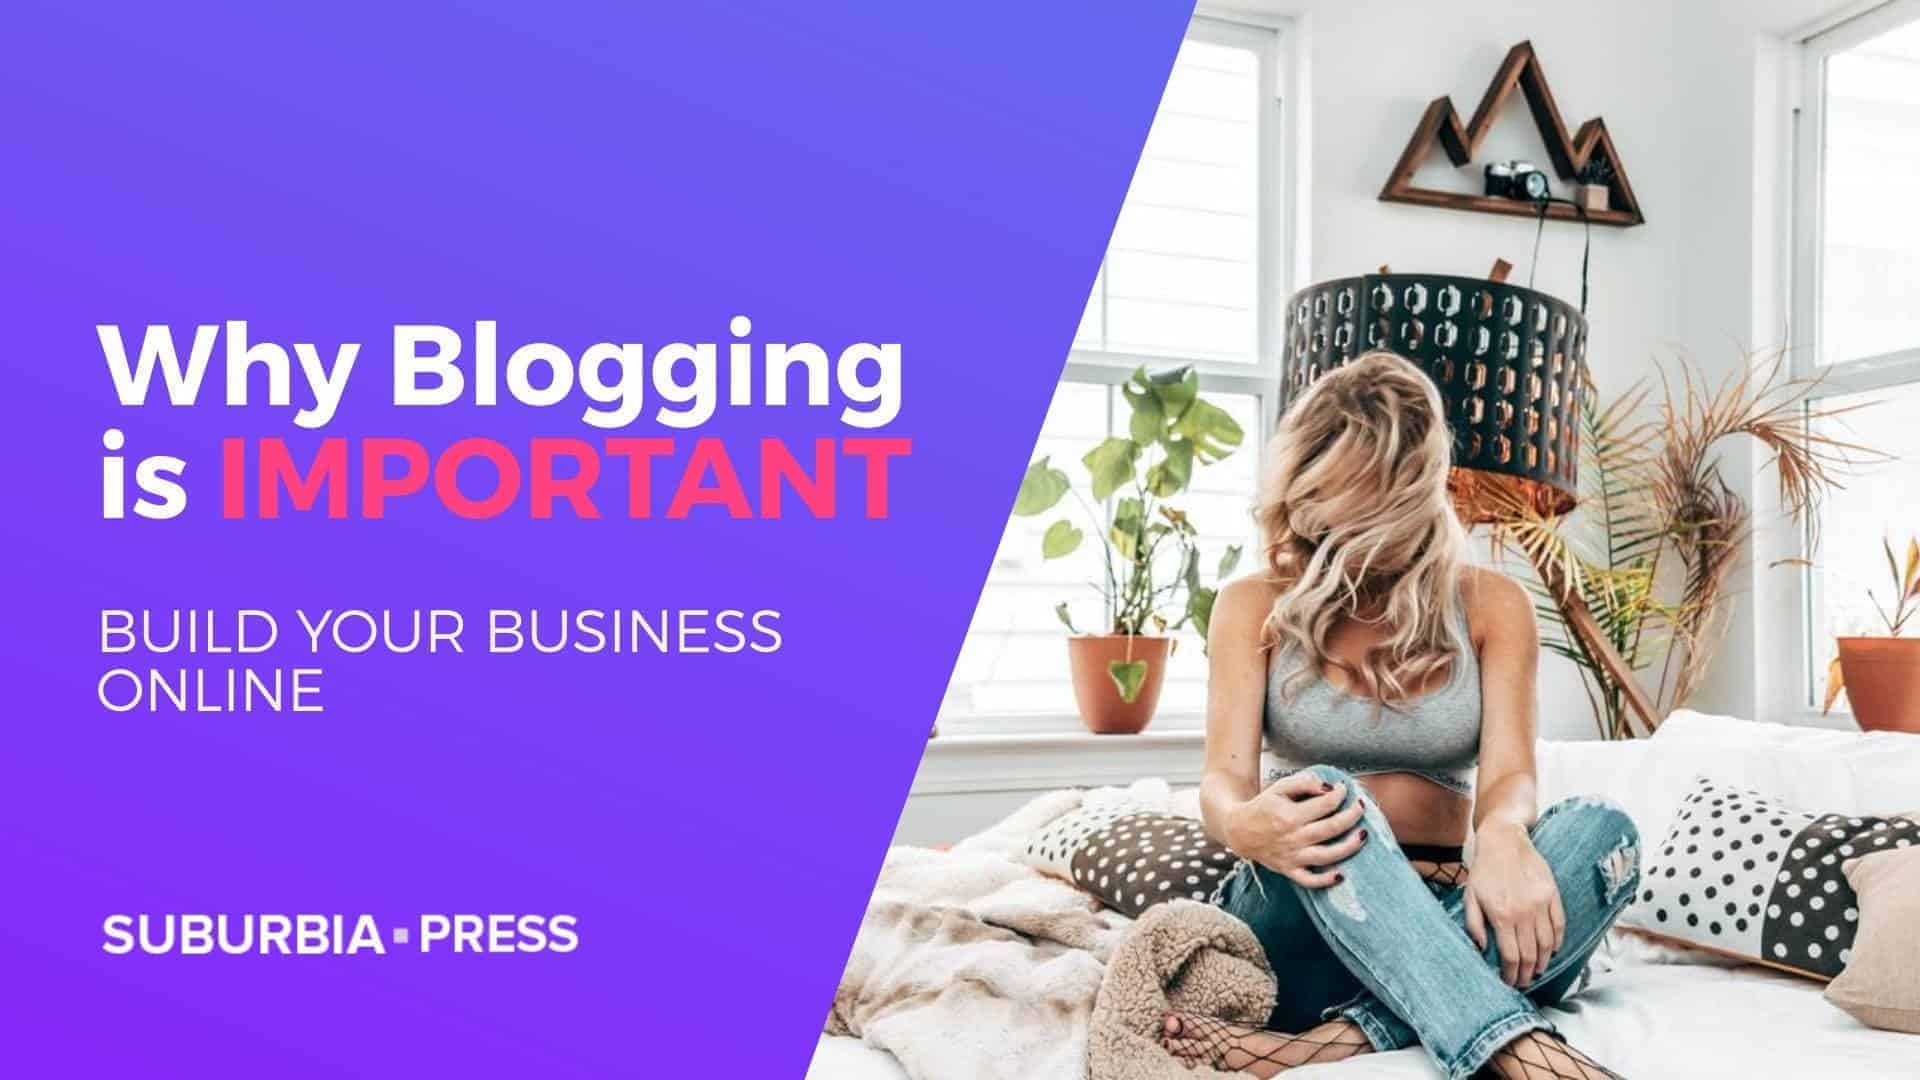 Why Blogging is Important to Share and Help Others